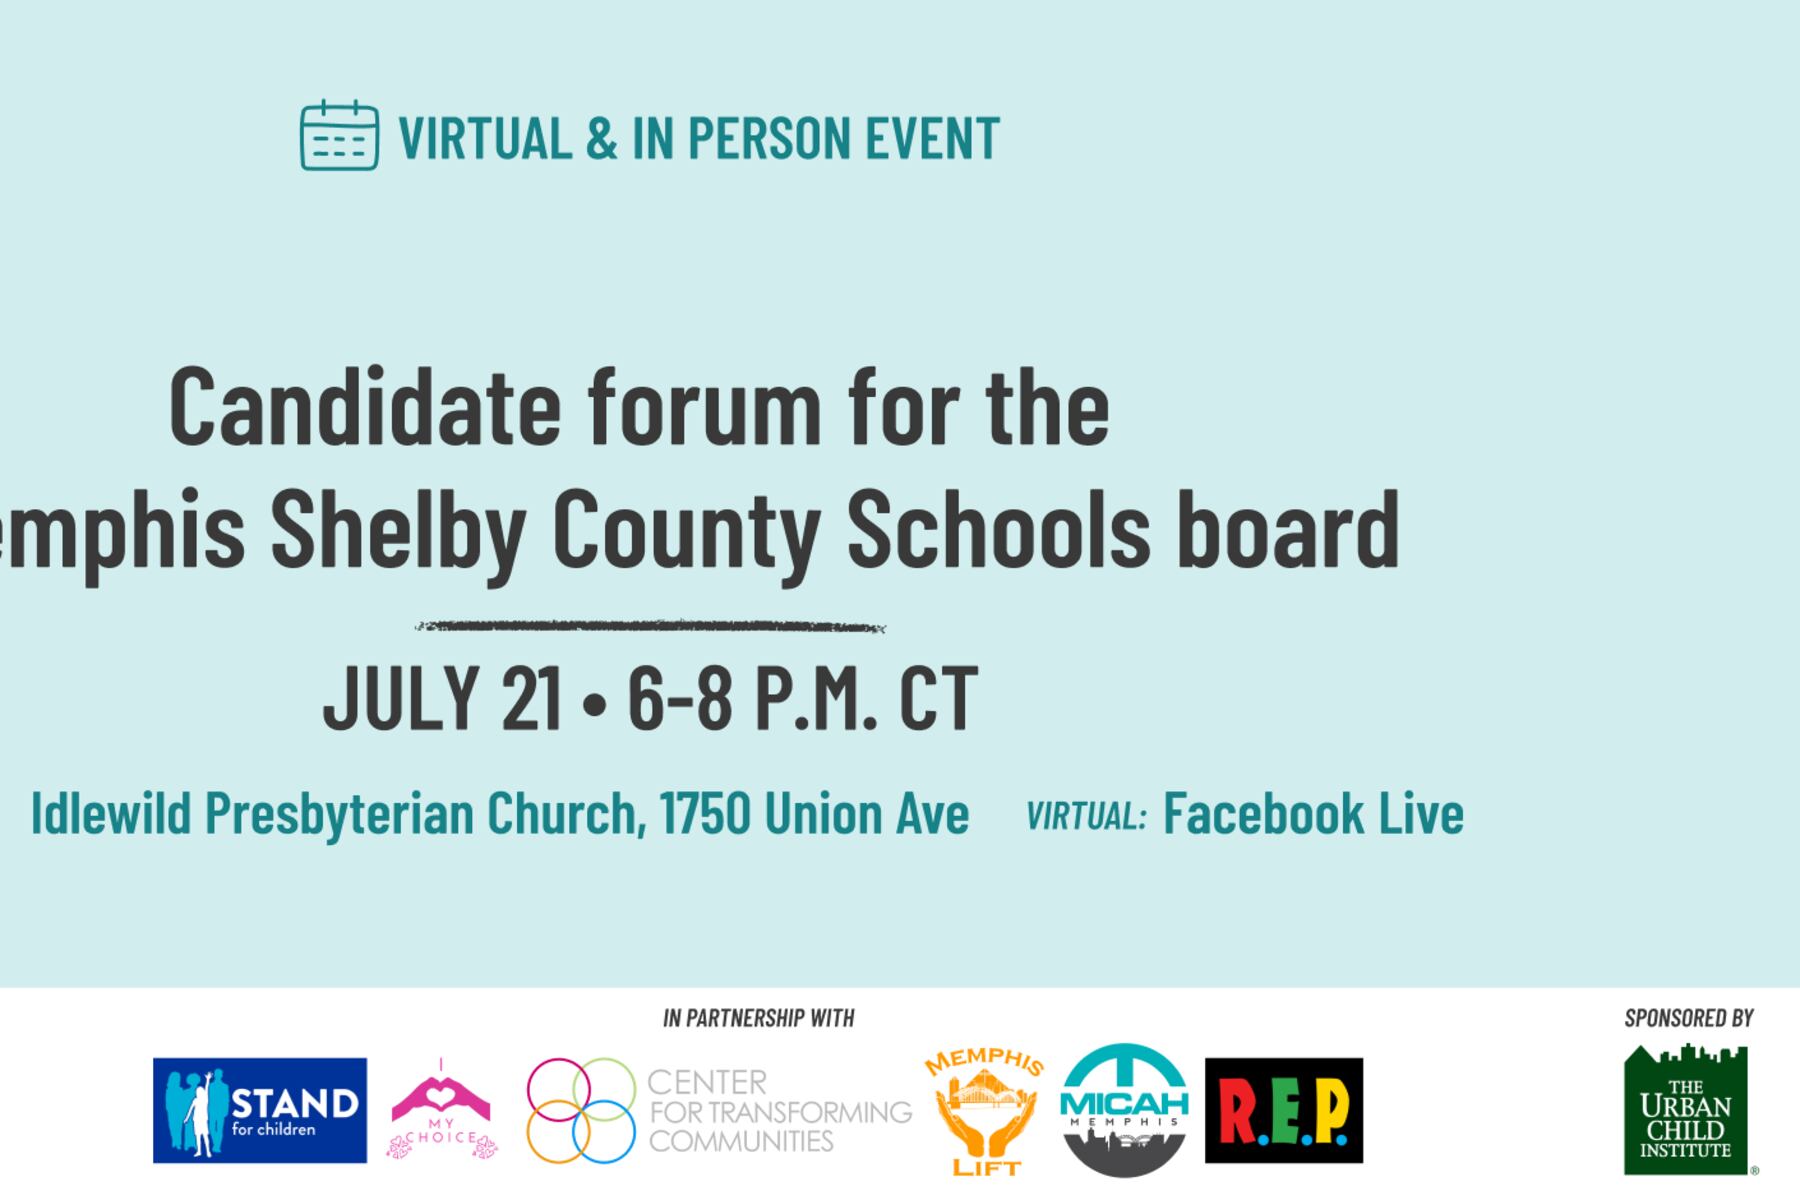 Promotional image of event with title “Forum: Who is running for the Memphis Shelby County Schools board?” against a blue backdrop.